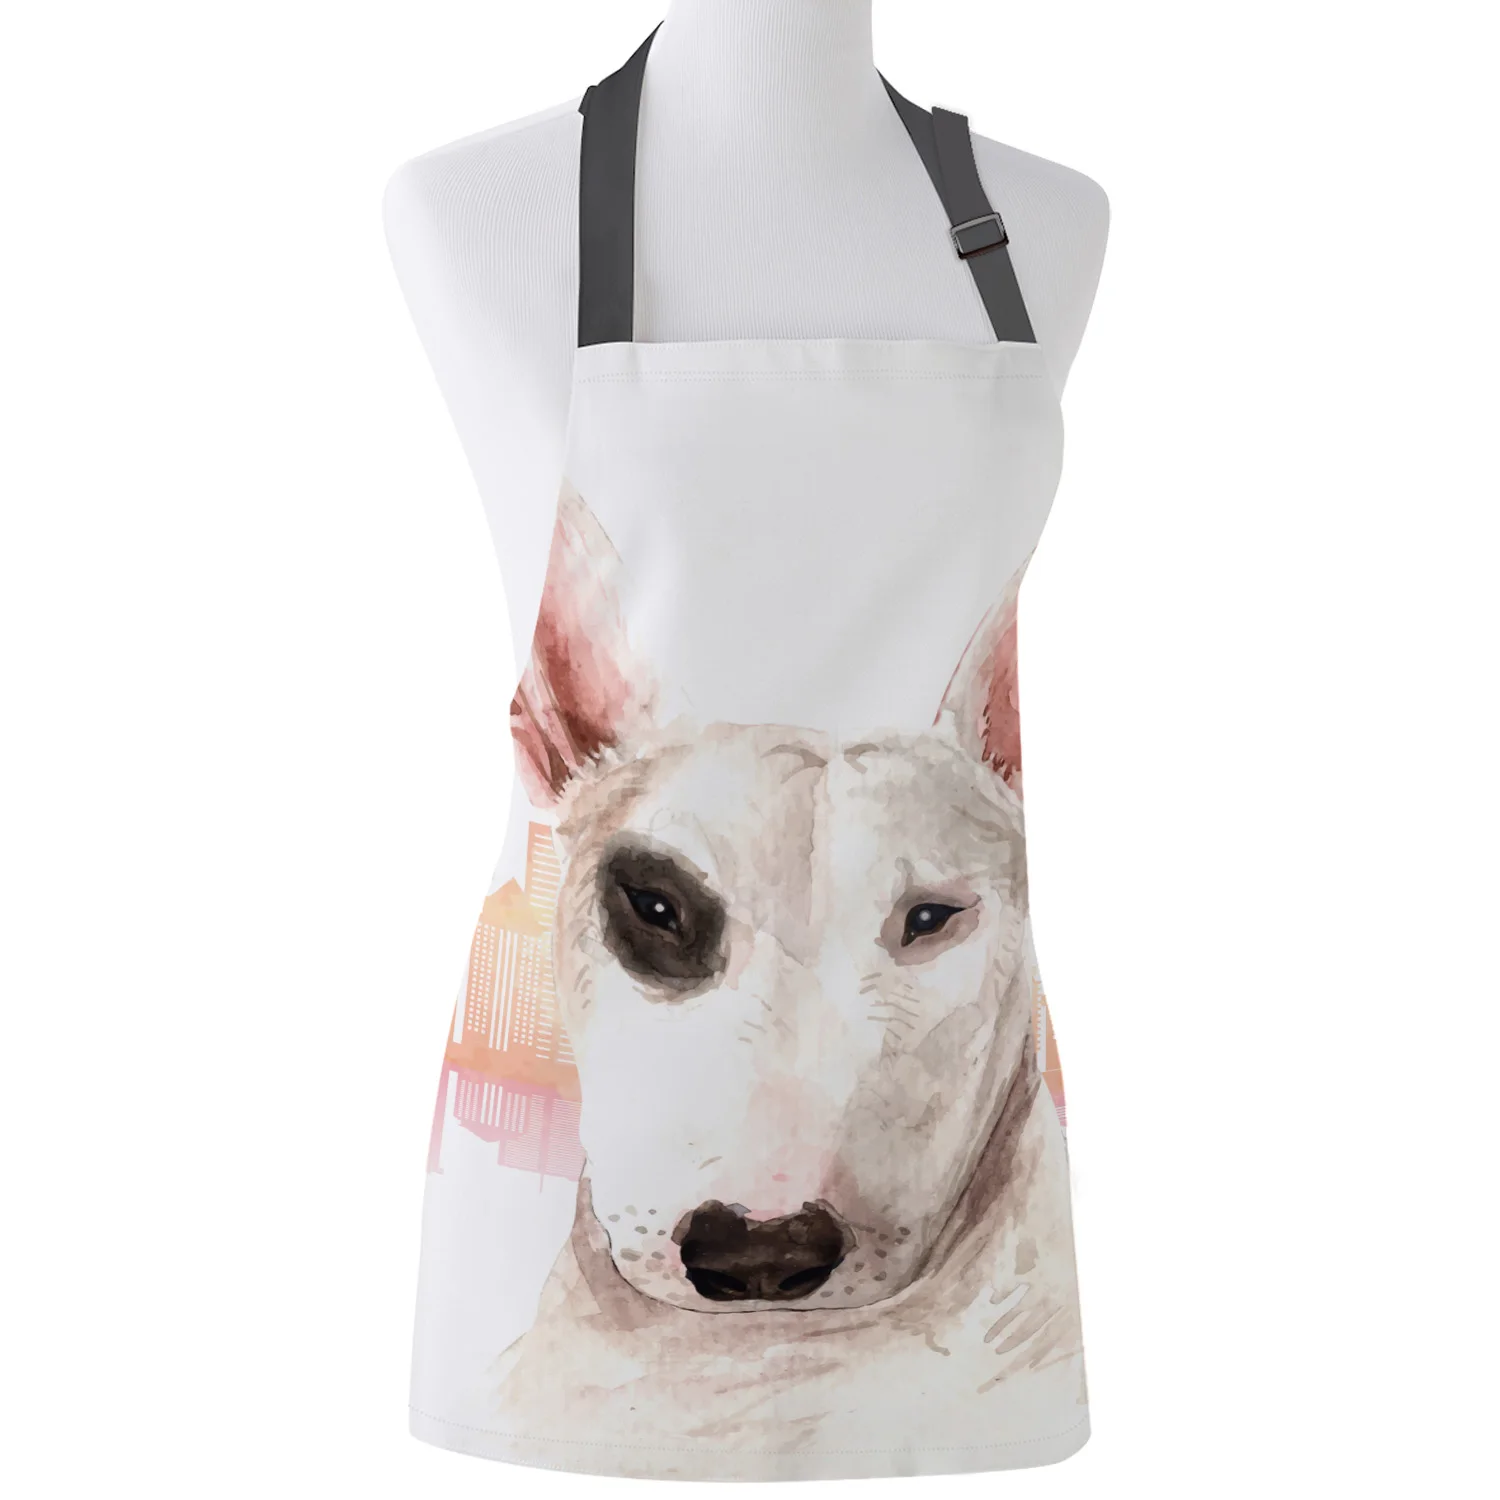 

Funny Apron Vancouver City Building Bull Terrier Dog Kitchen Aprons for Women Man Kids Home Cooking Baking Waist Bib Home Use